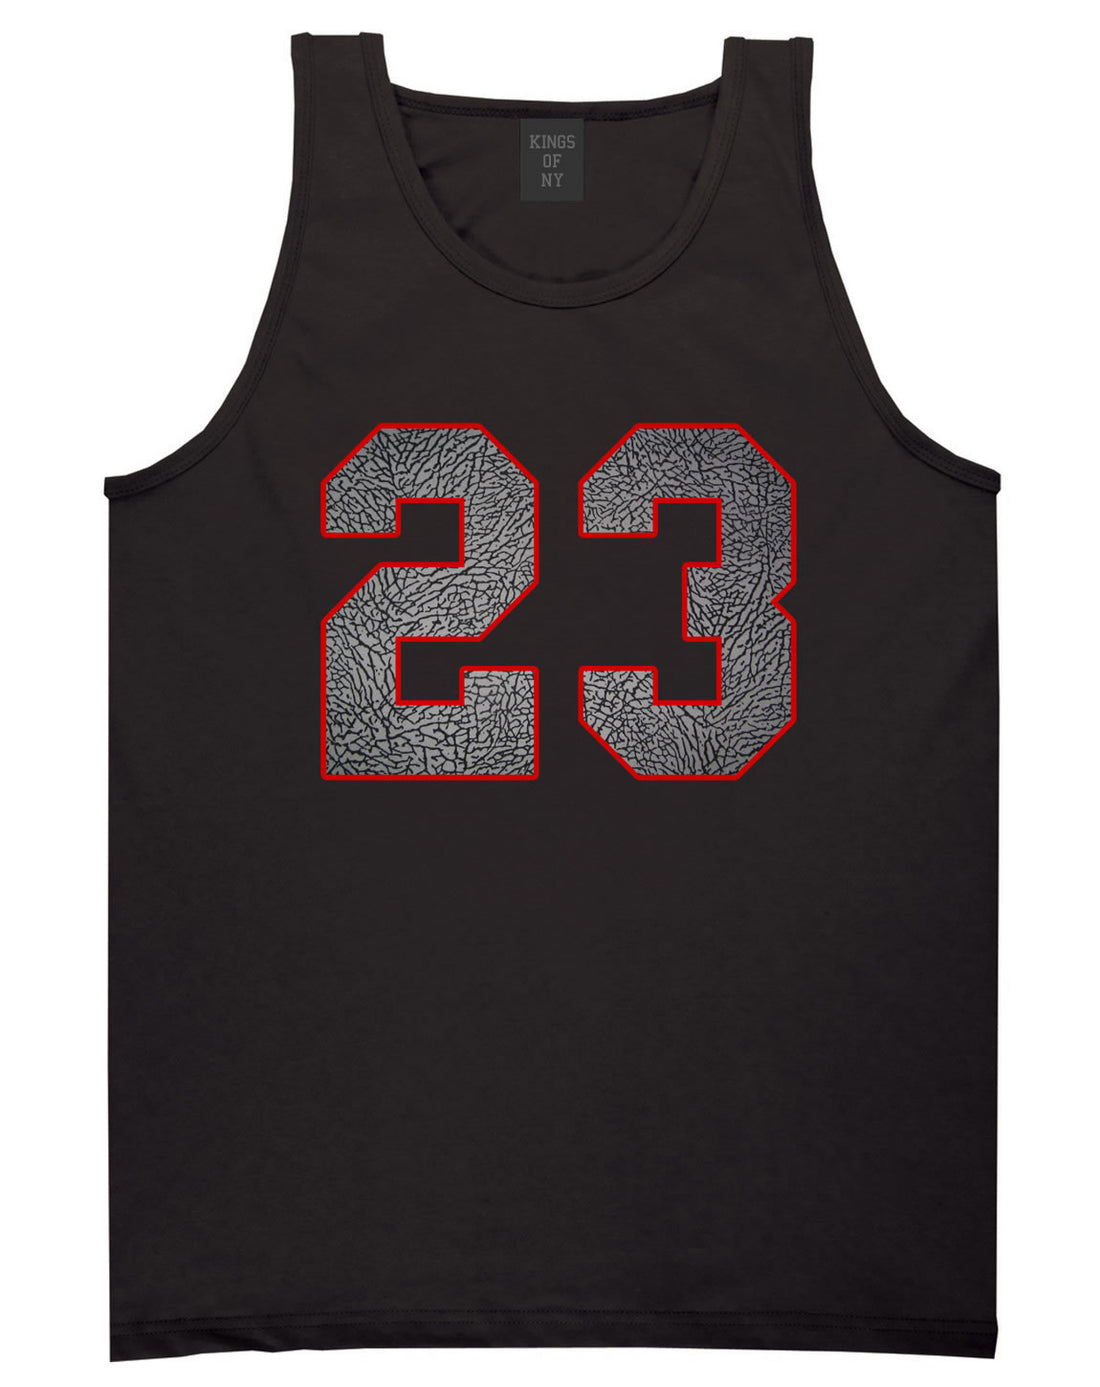 23 Cement Red Jersey Tank Top in Black By Kings Of NY